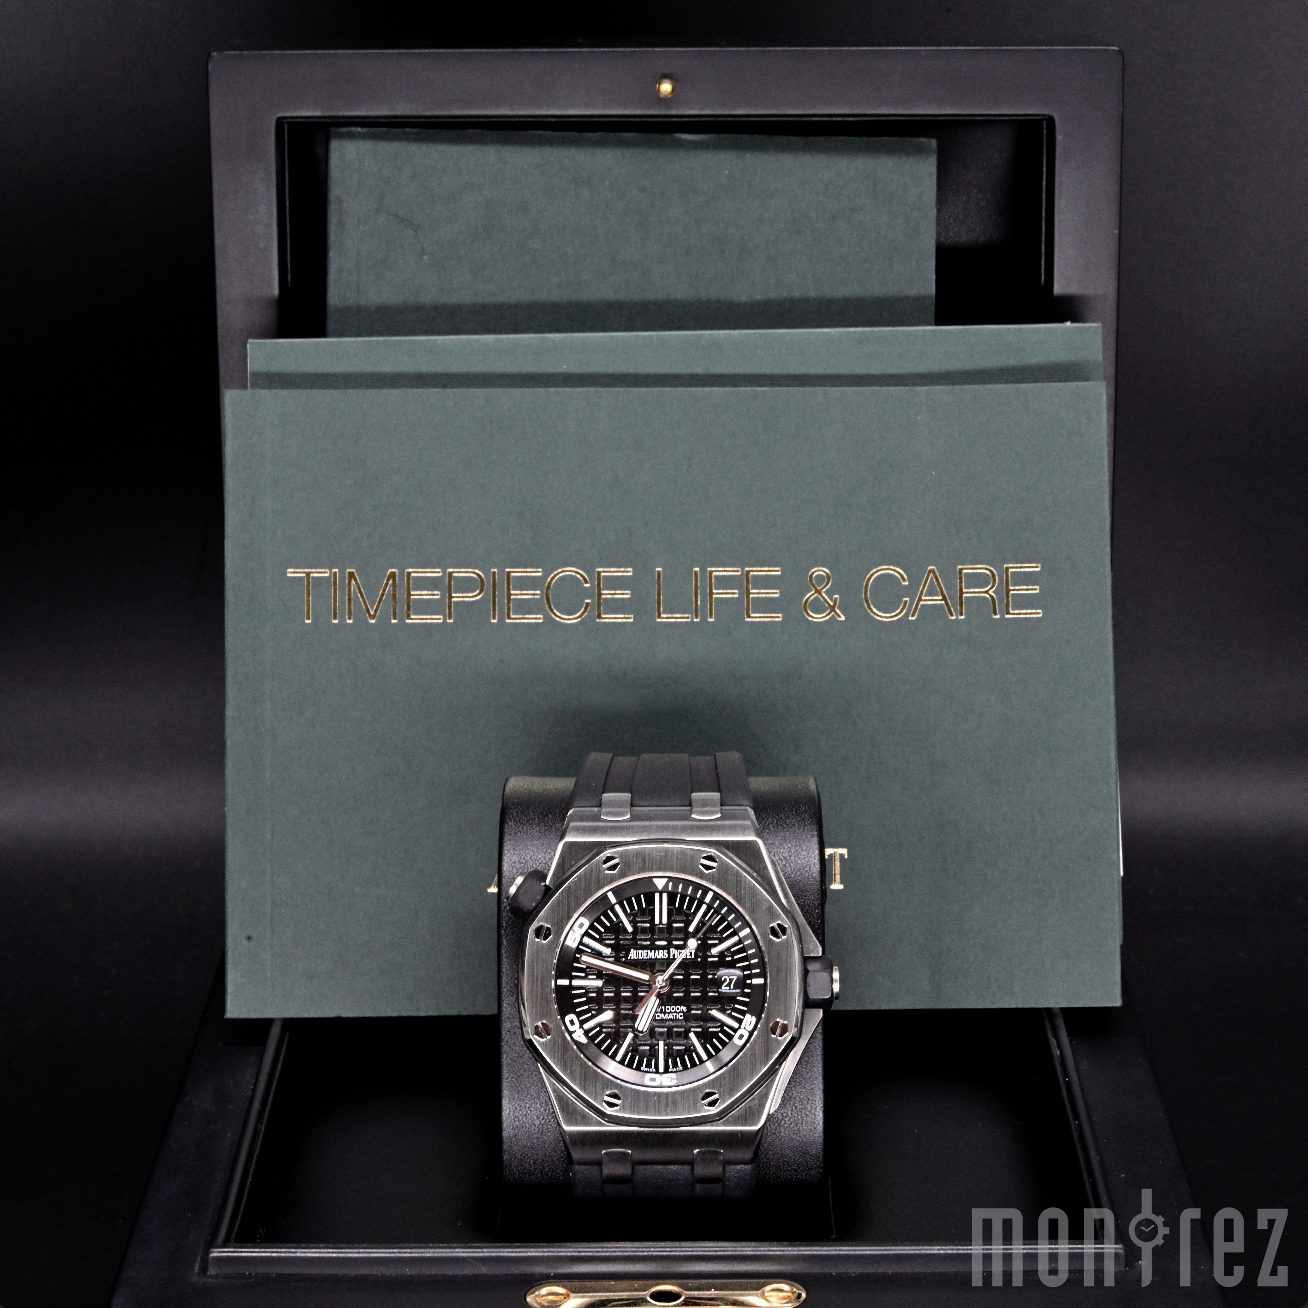 [Pre-Owned Watch] Audemars Piguet Royal Oak Offshore Diver 42mm 15703ST.OO.A002CA.01 (Out of Production)